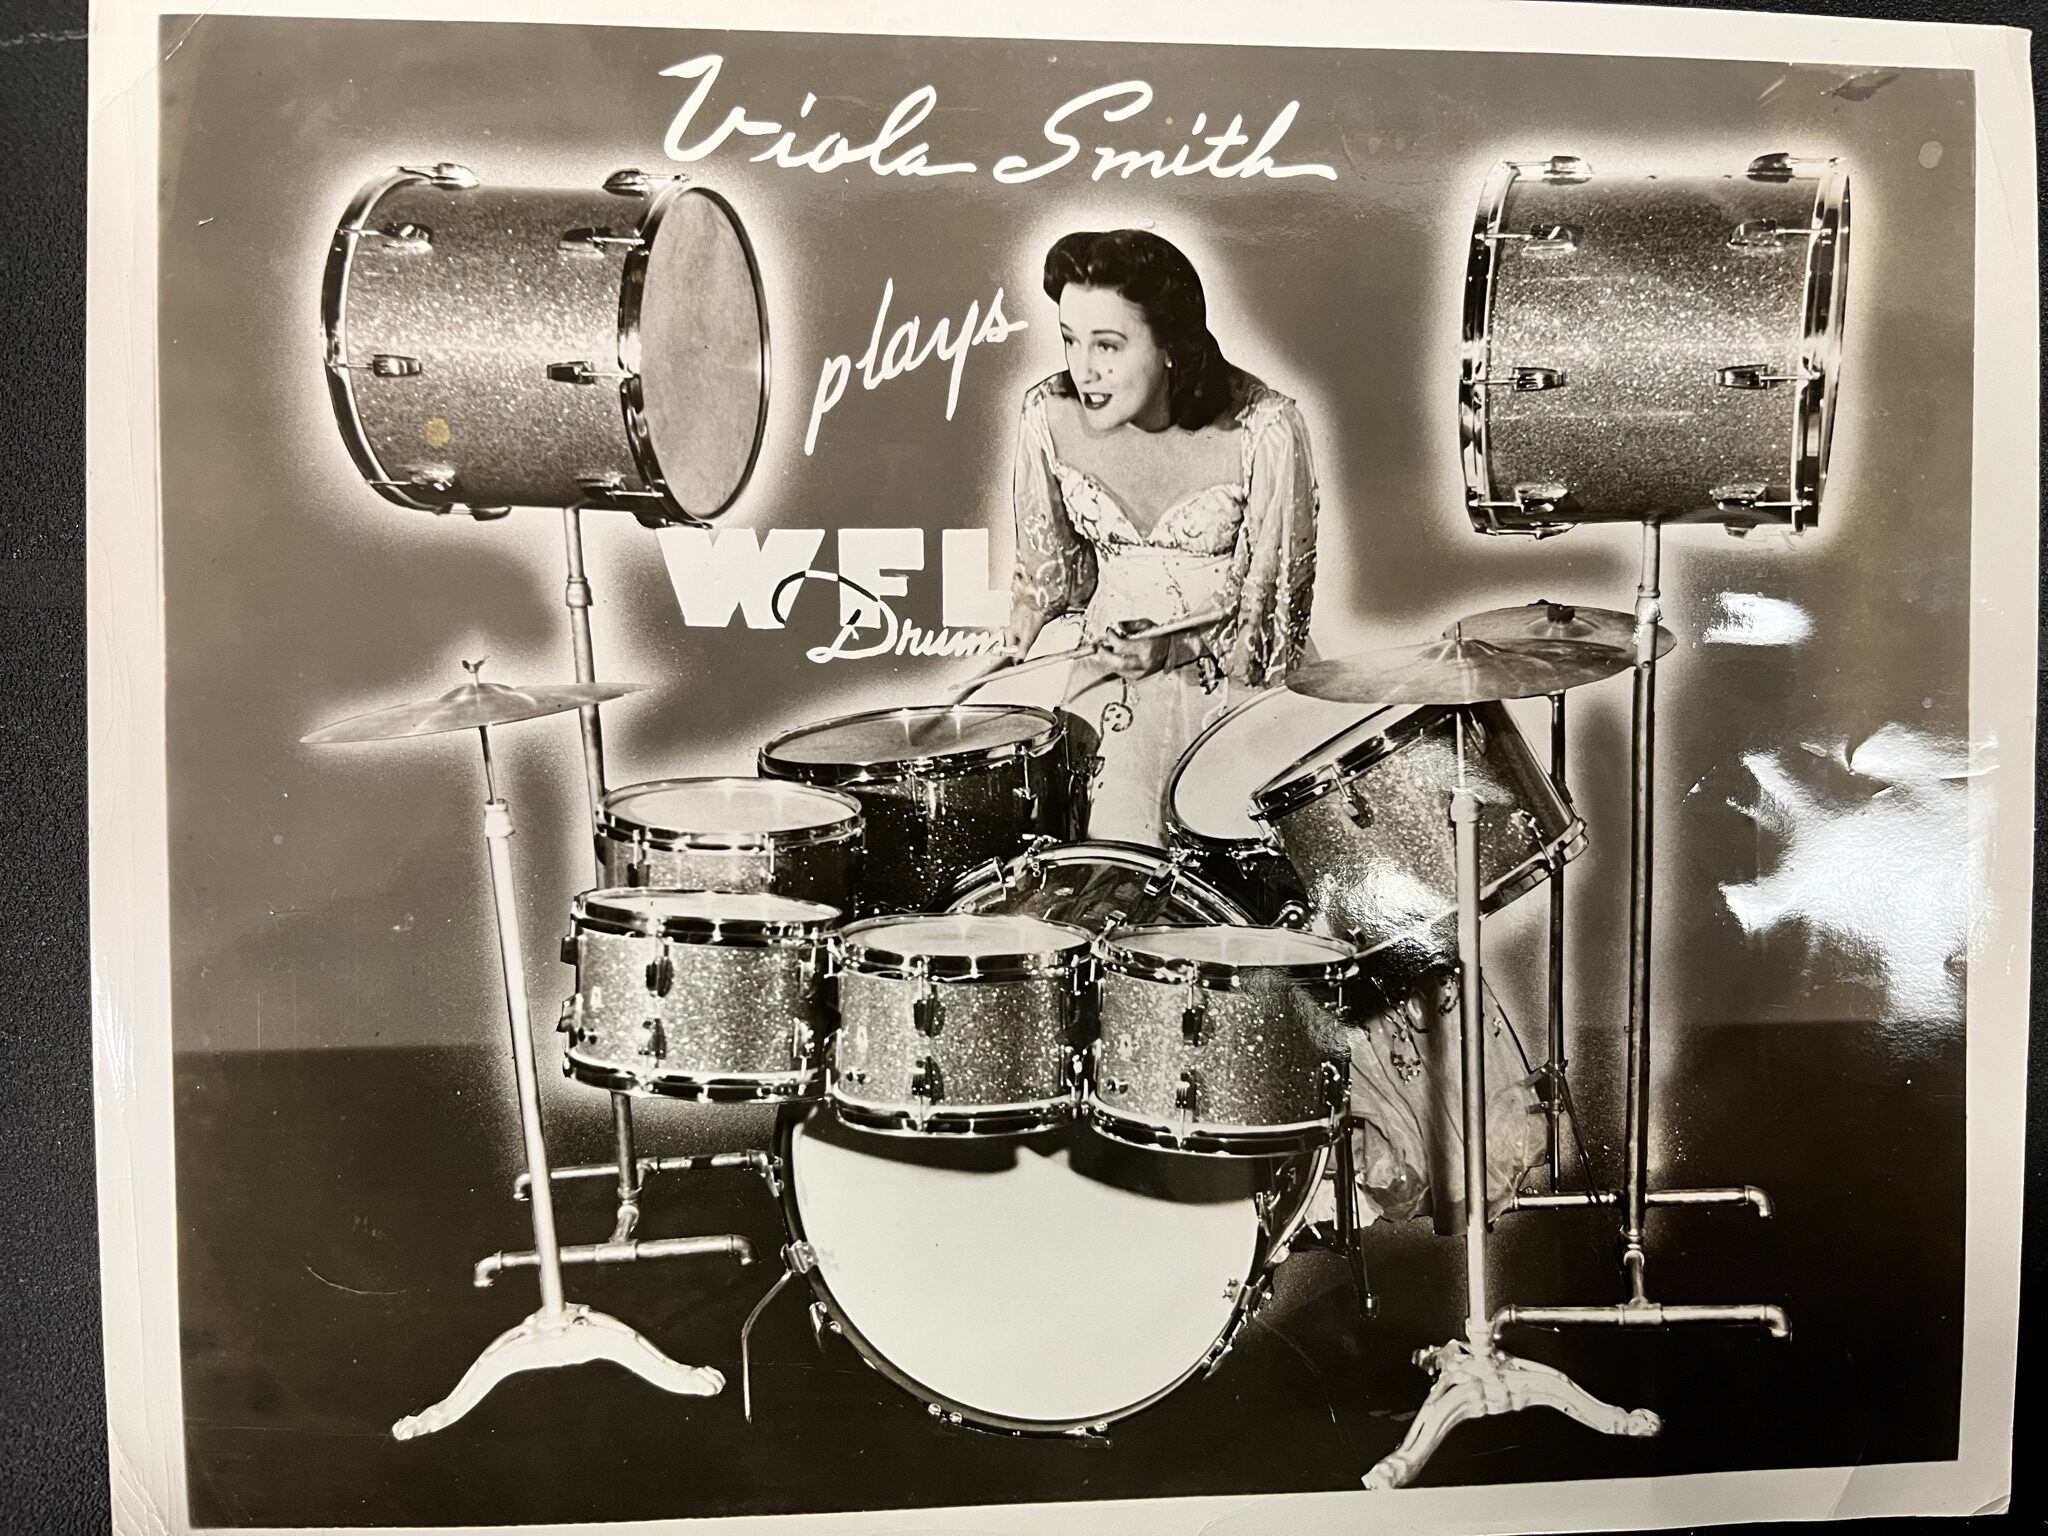 ‘The fastest girl drummer in the world’: Celebrating Wisconsin’s Viola Smith